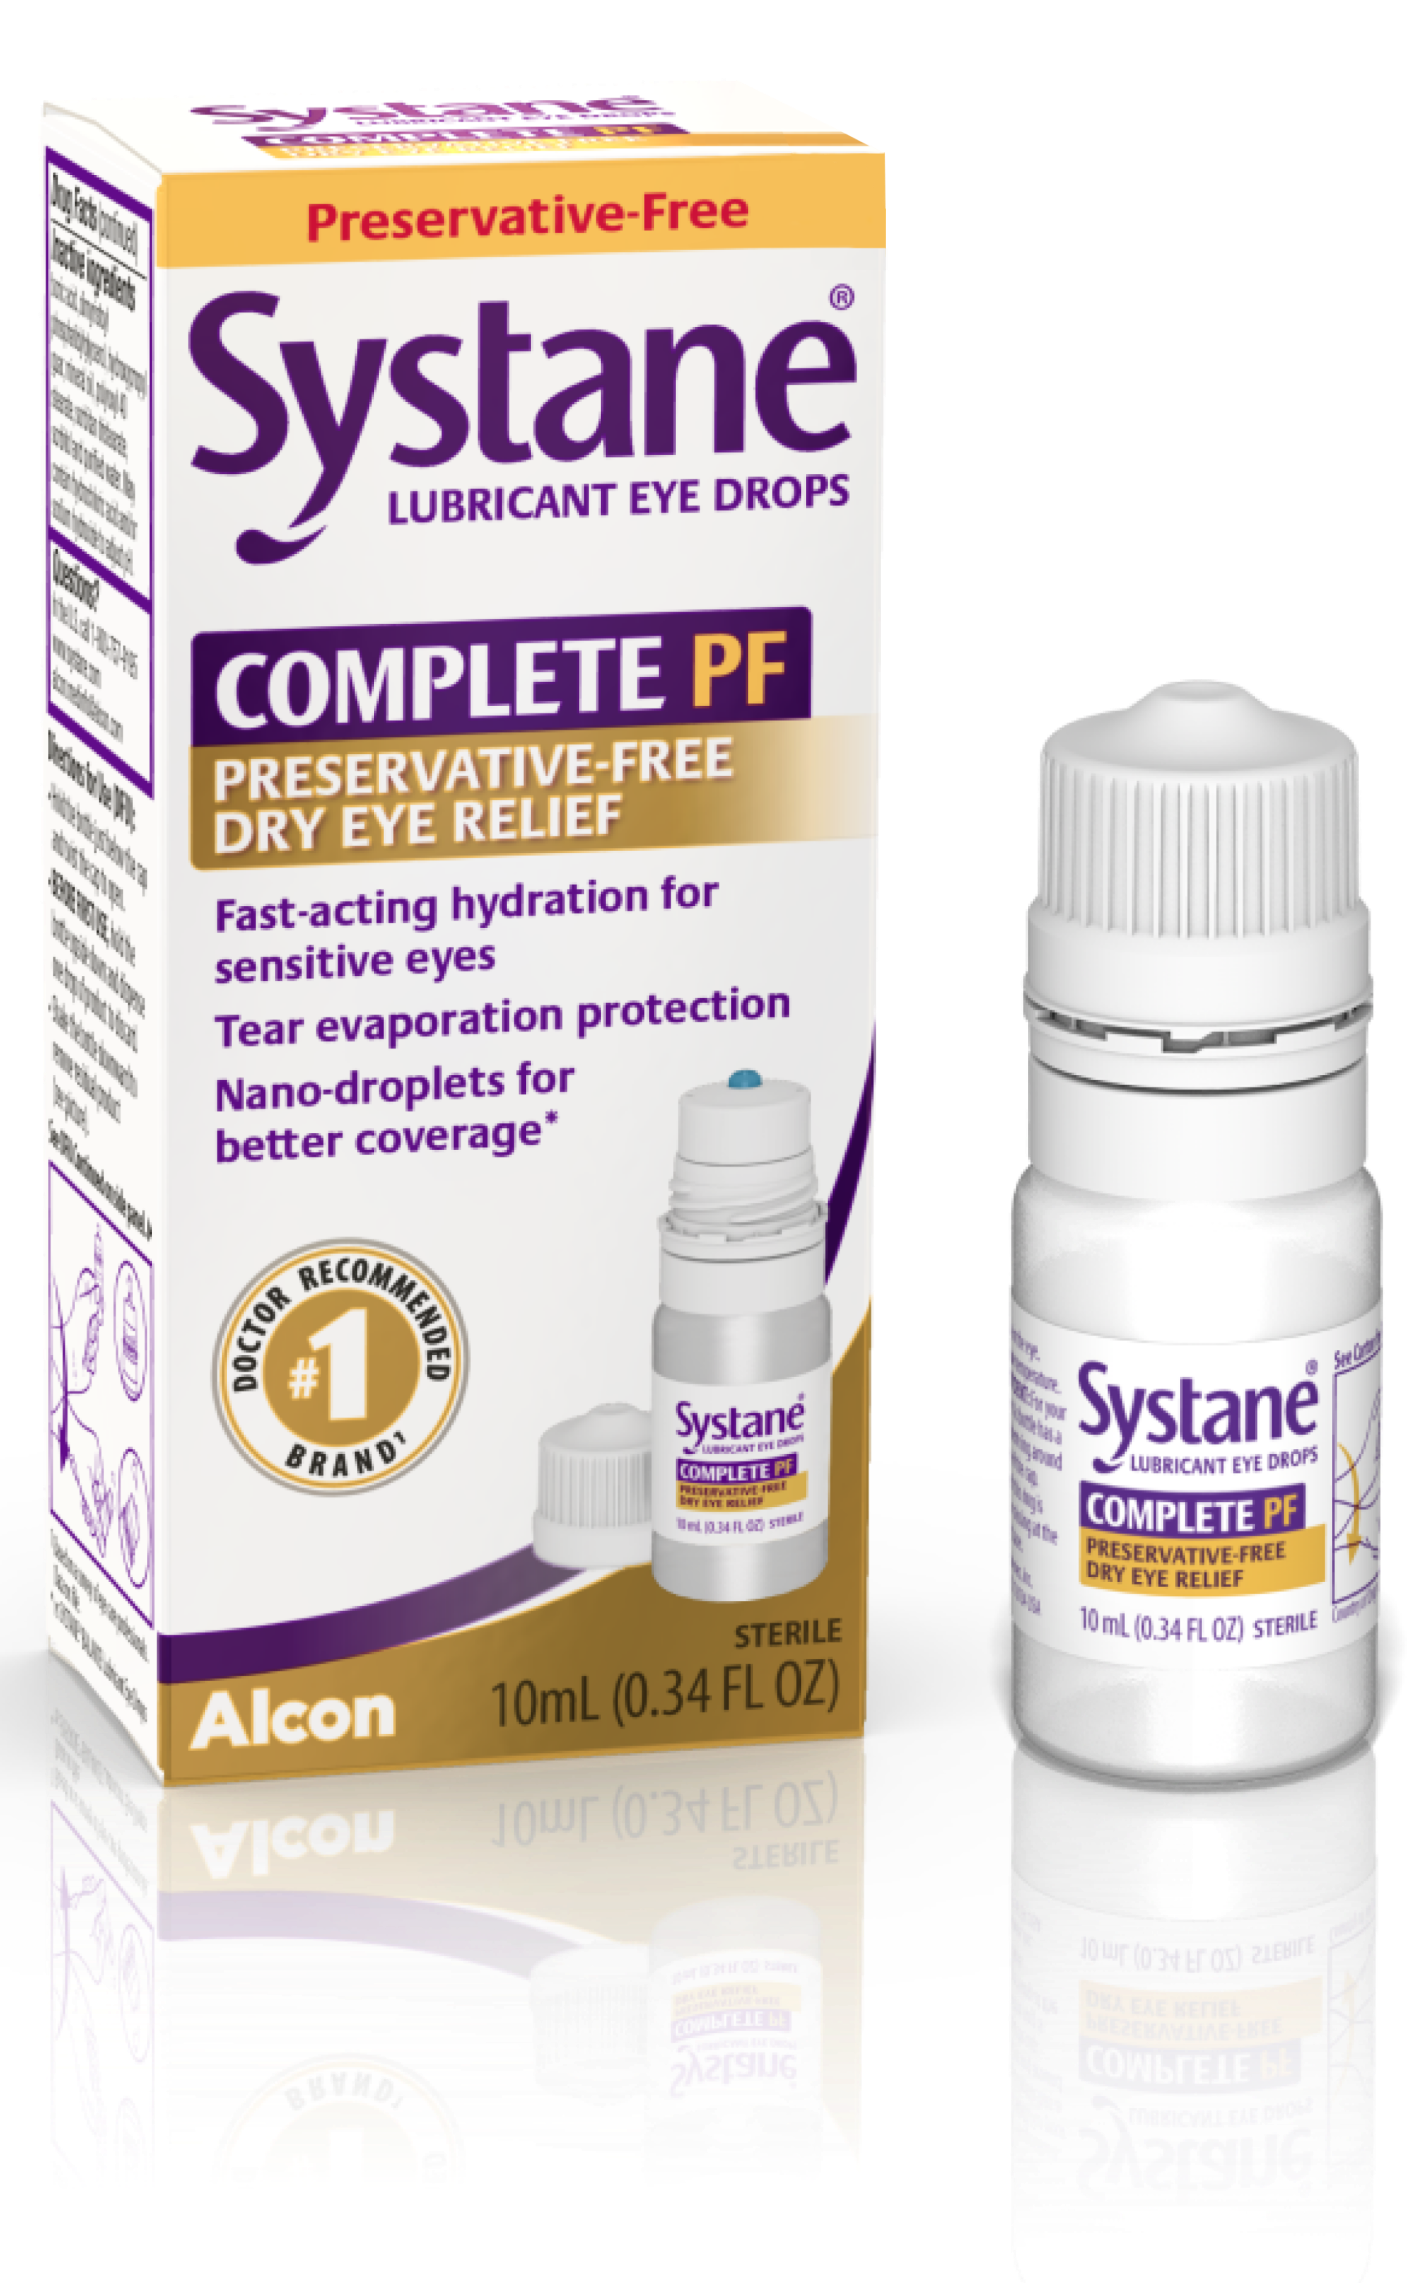 New Systane Complete Preservative-free Lubricating Eye Drops box and multi-dose bottle